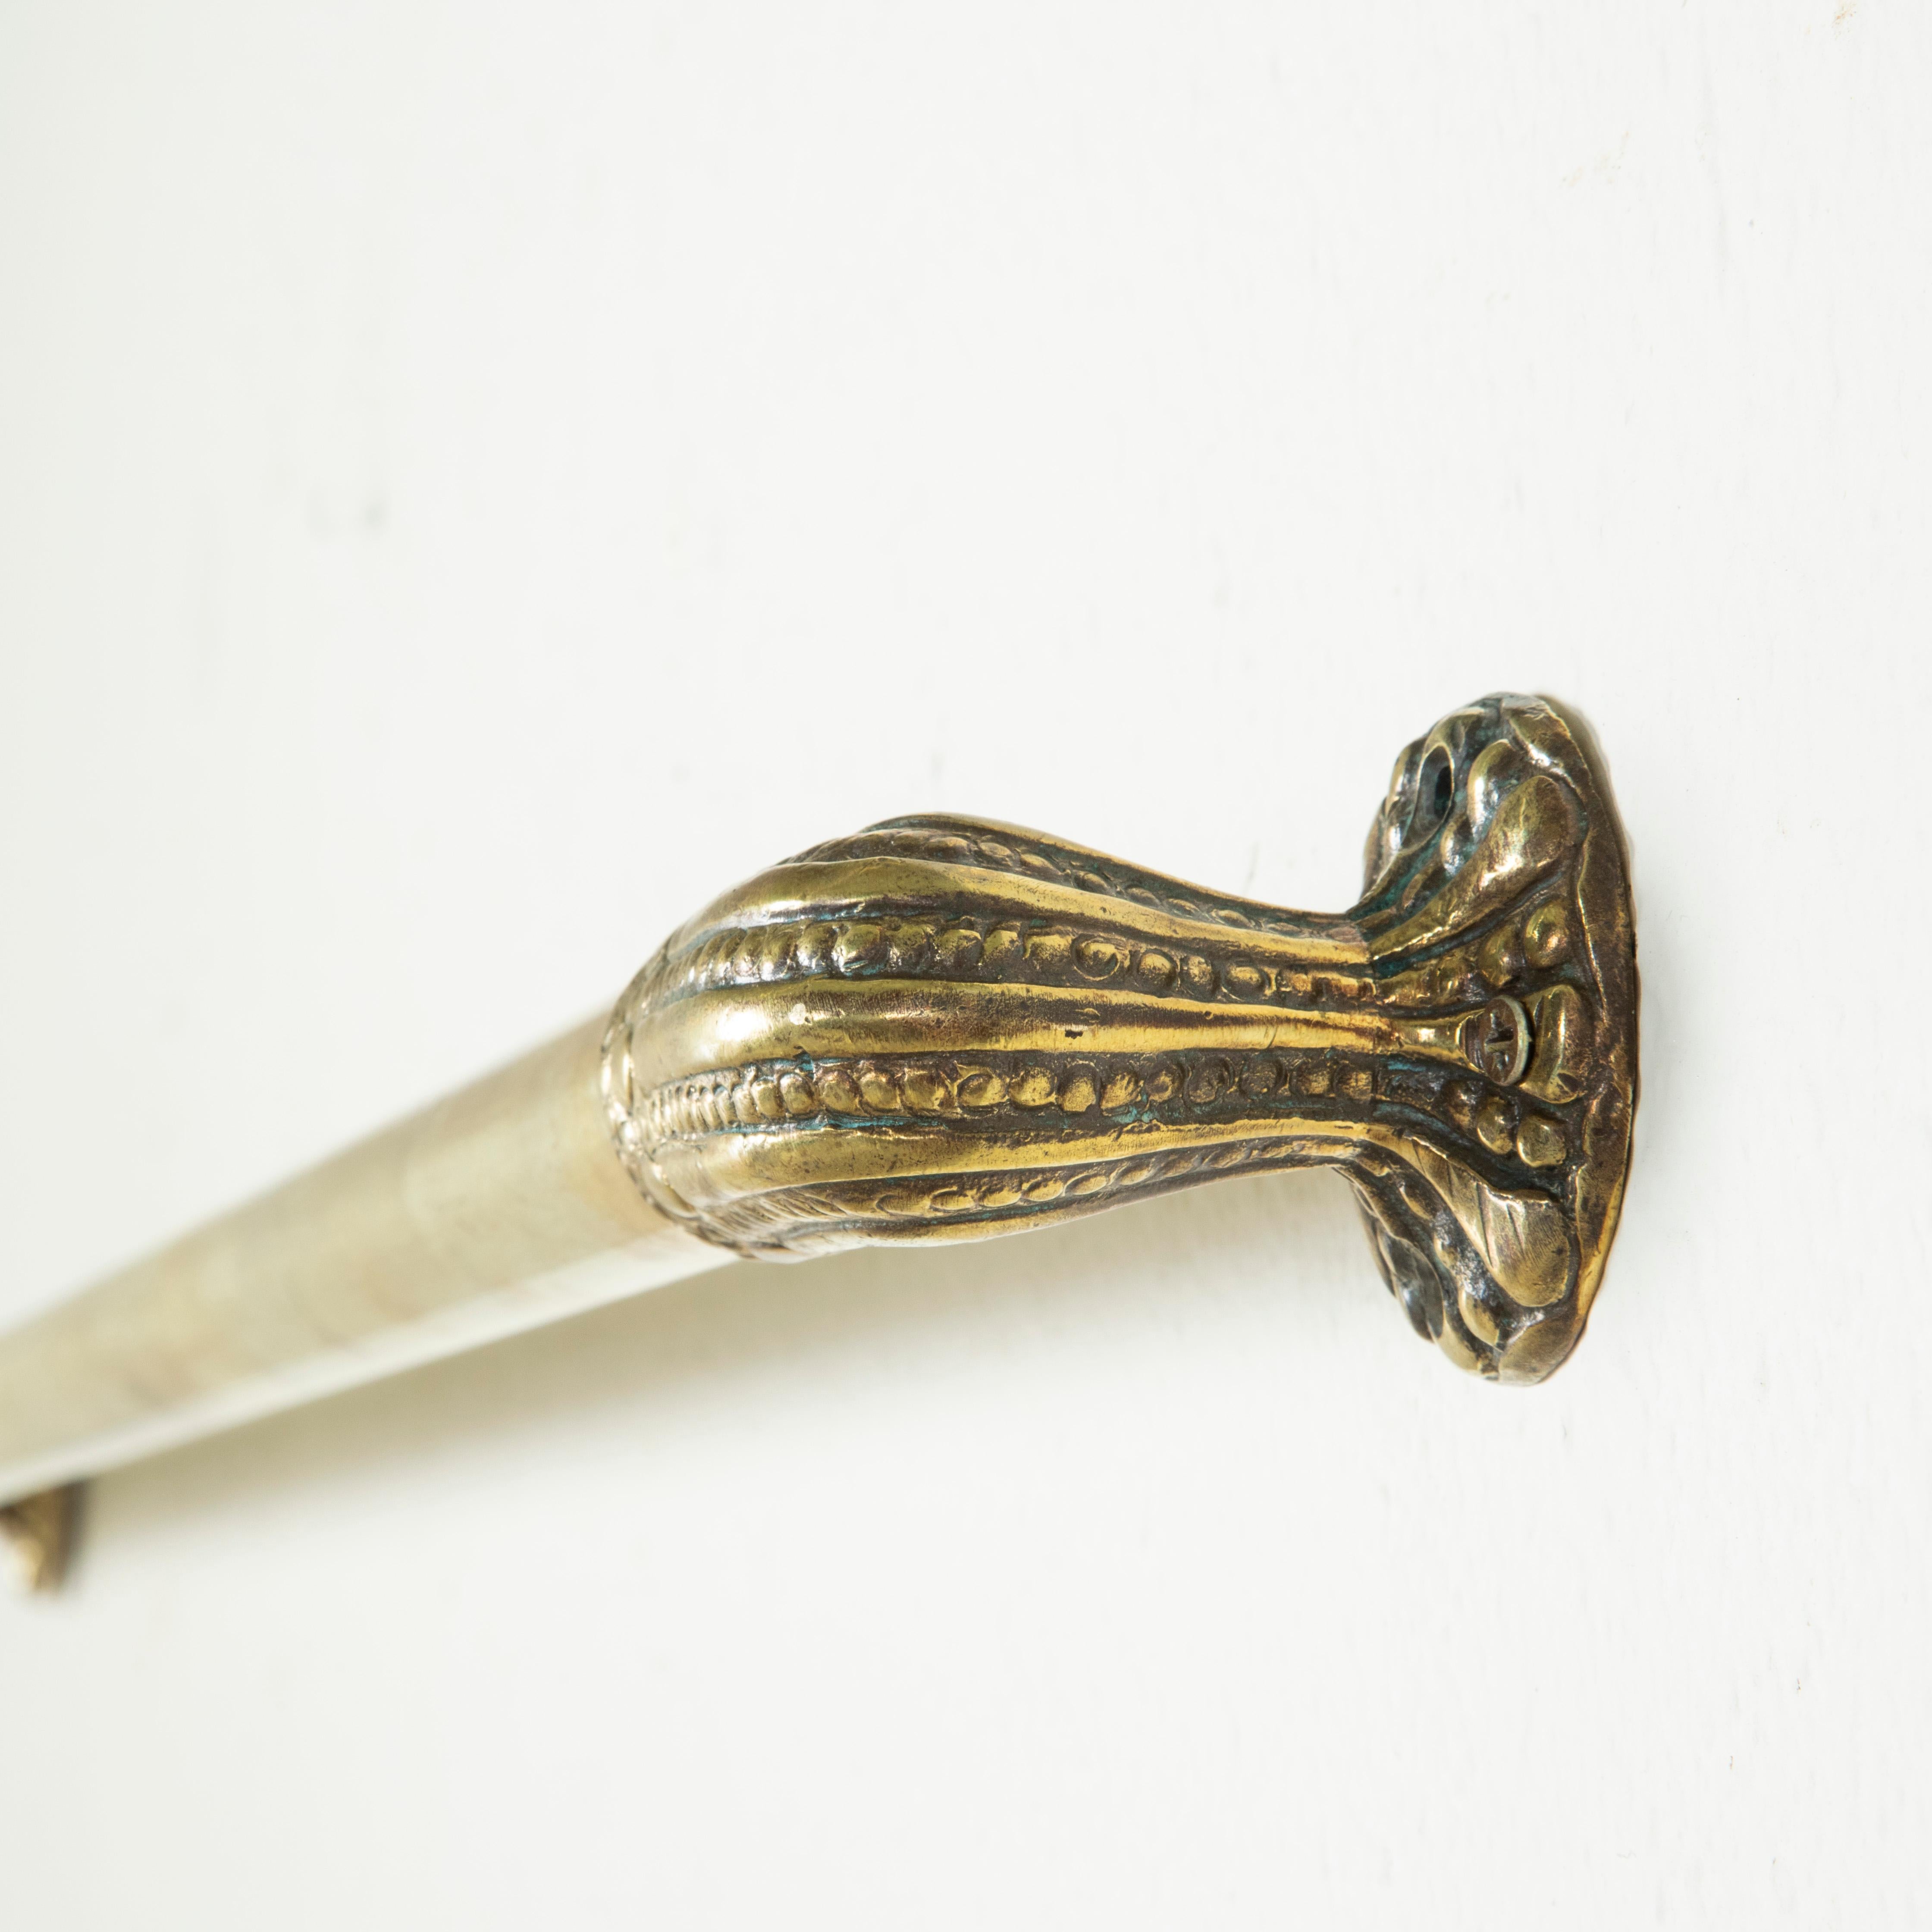 Art Nouveau Long French Brass Hand Rail or Towel Bar with Beaded Motif, circa 1900